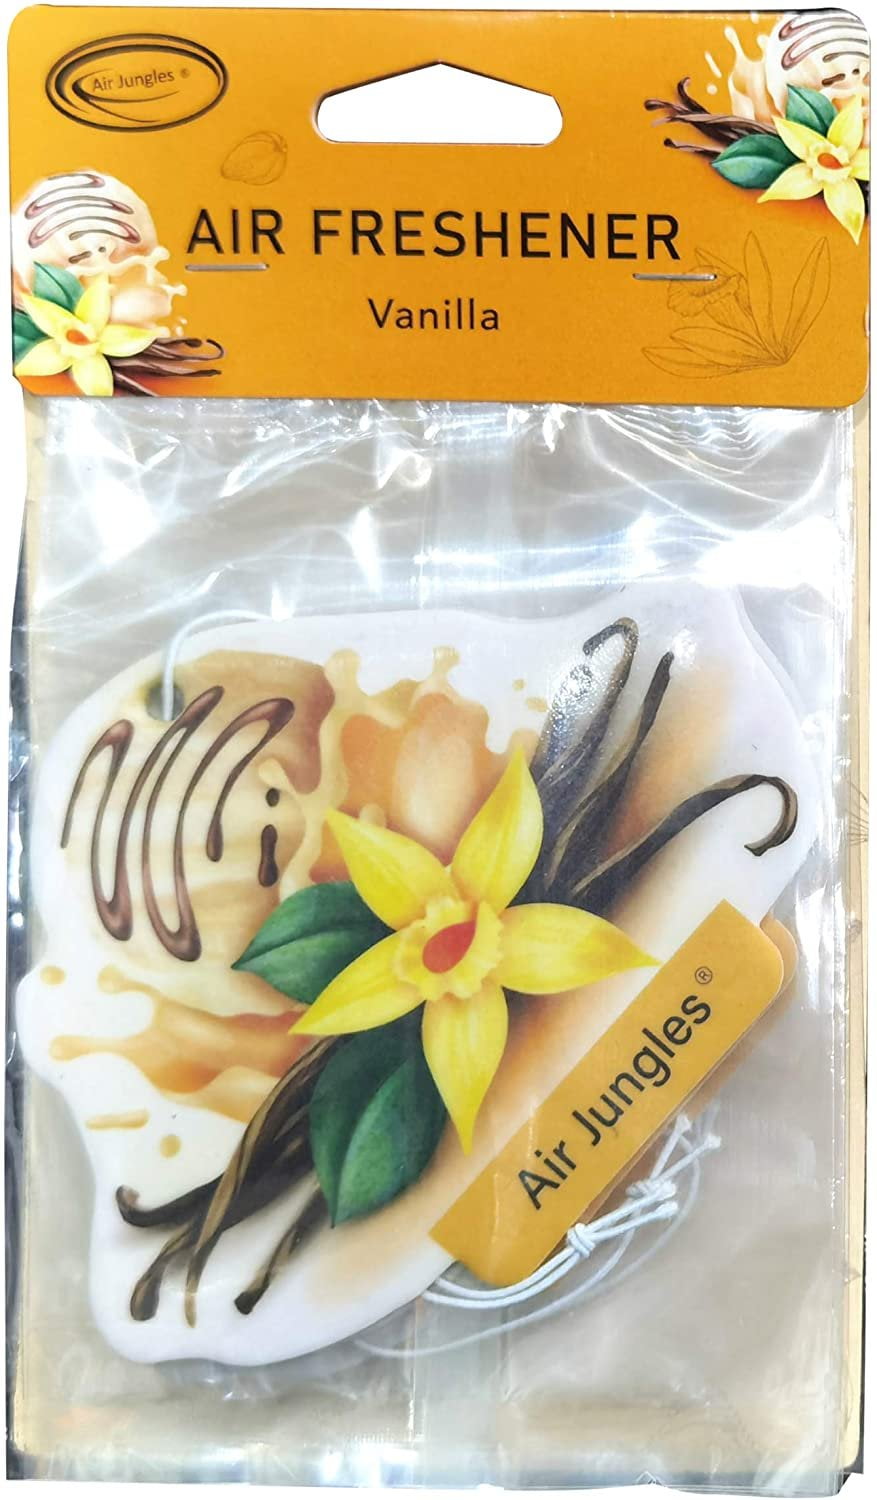 Air Jungles Car Air Freshener Hanging Vanilla 6 Count, Natural Essential  Oil Car Scent Refresh Whole Car, Air Refresheners for Automotive, Home, and  Office 